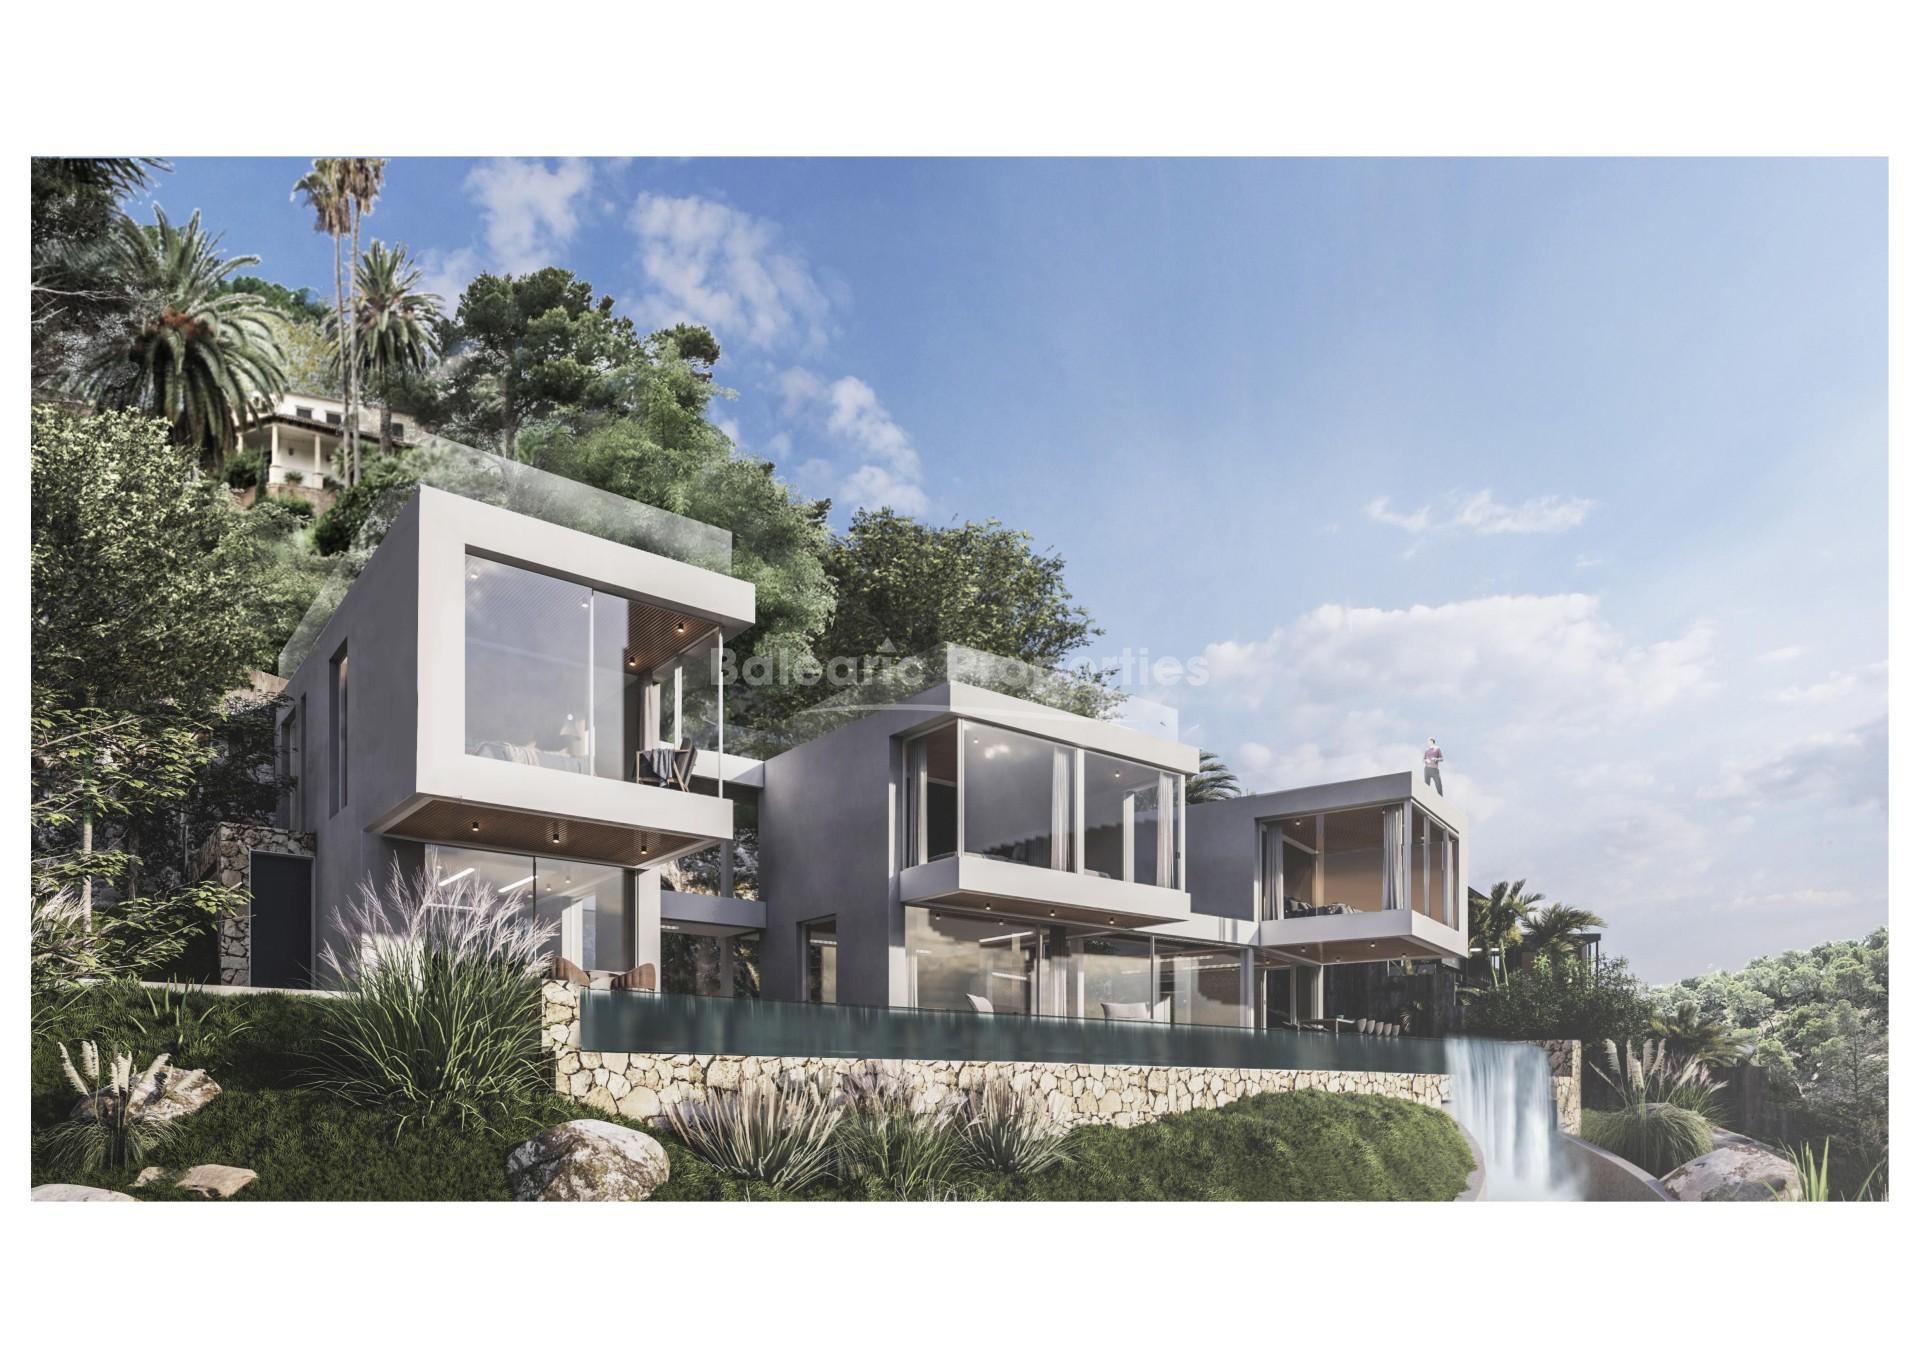 Project of modern villa with panoramic sea views for sale in Portals Nous, Mallorca